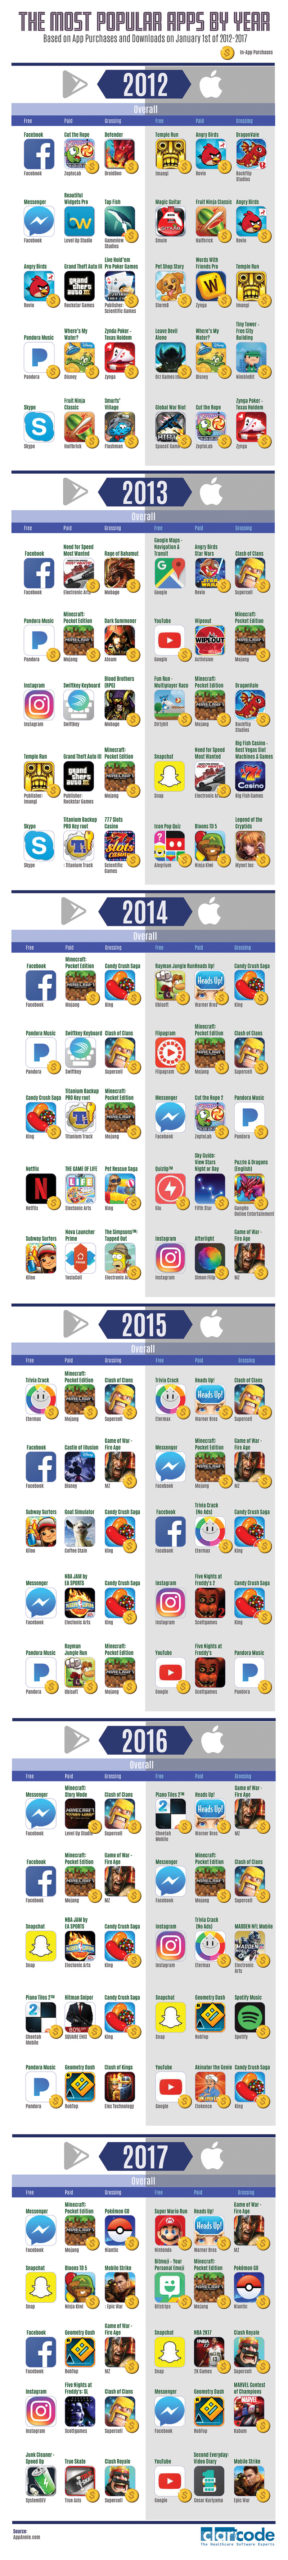 The Most Popular Apps Since 2012 [Infographic]